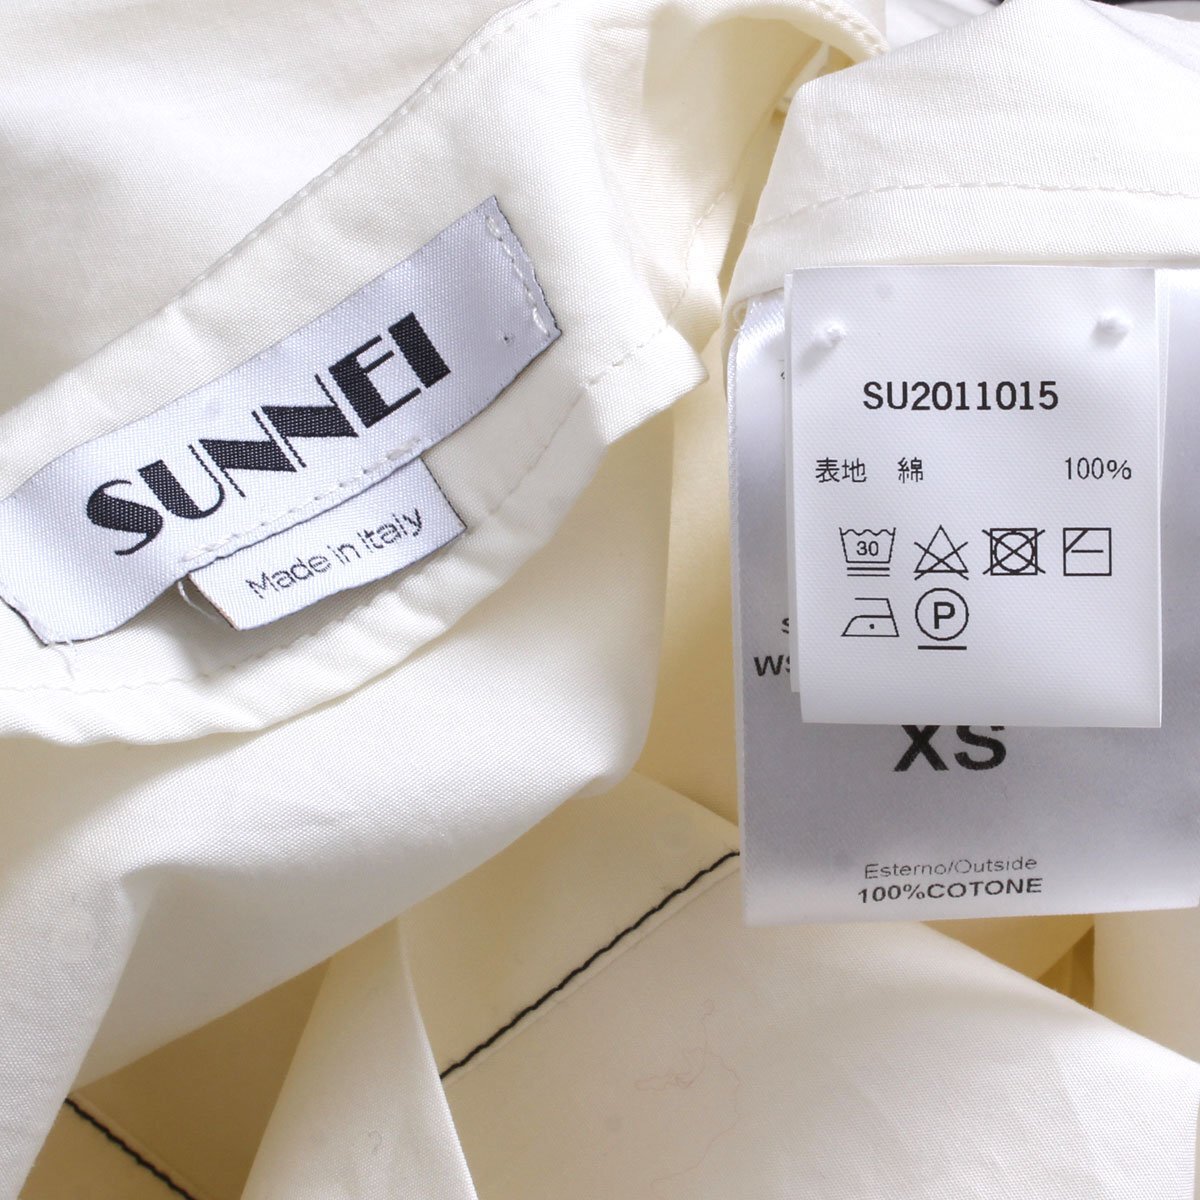 SUNNEI OVER SHIRT W DOUBLE SLEEVES regular price 70,950 jpy sizeXS white SU2011015snnei2way no sleeve double sleeve over shirt 